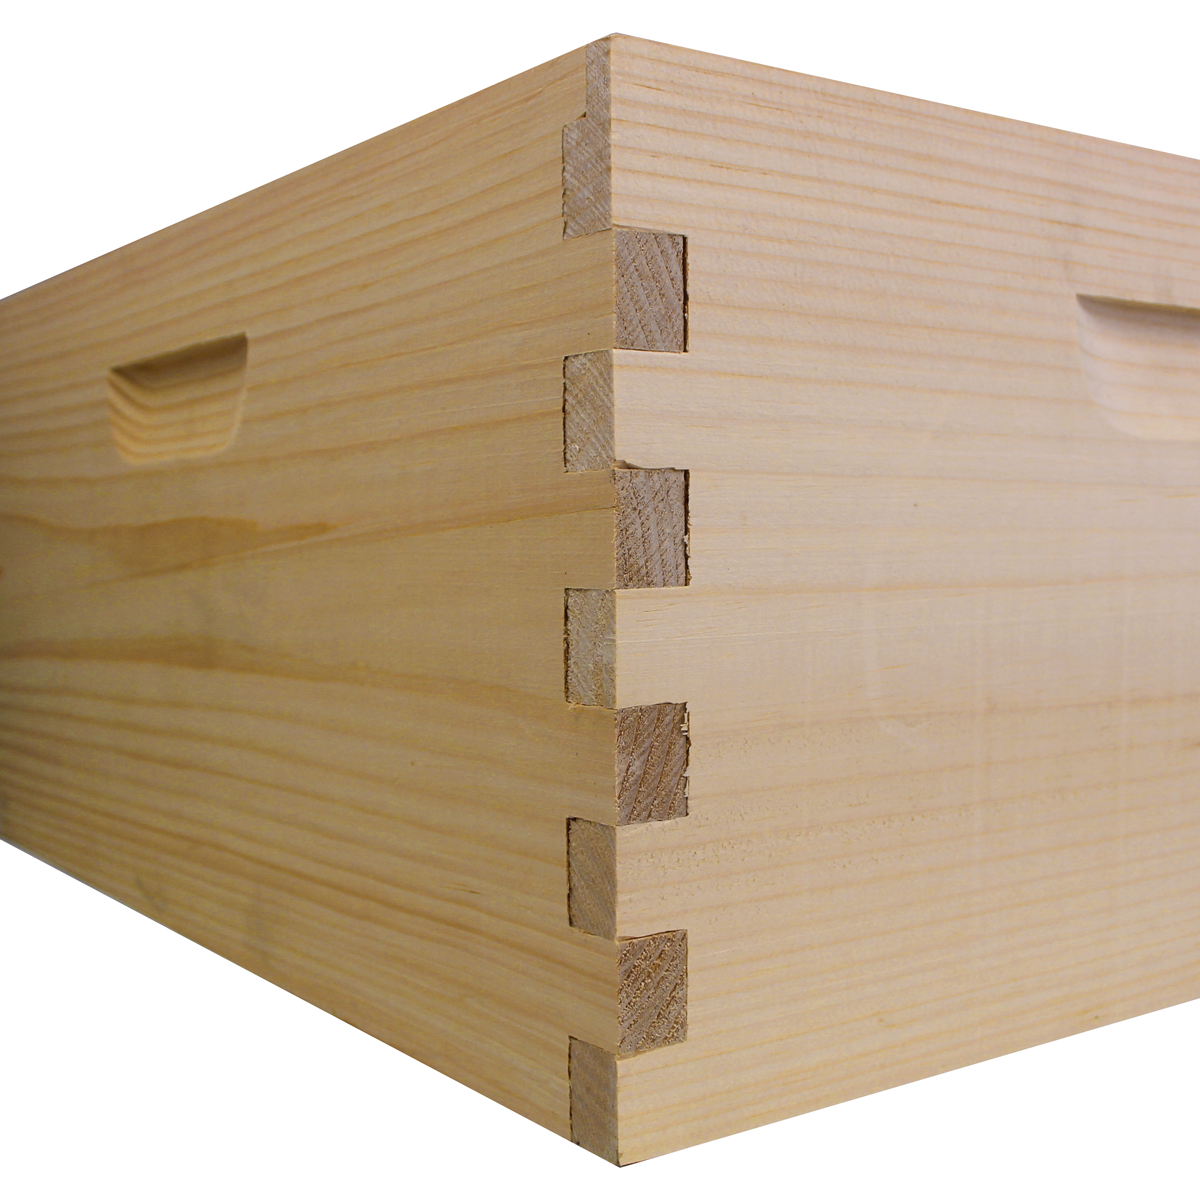 Busy Bees 'N' More Amish Made 10 Frame Deep Bee Box Uses Finger Joints